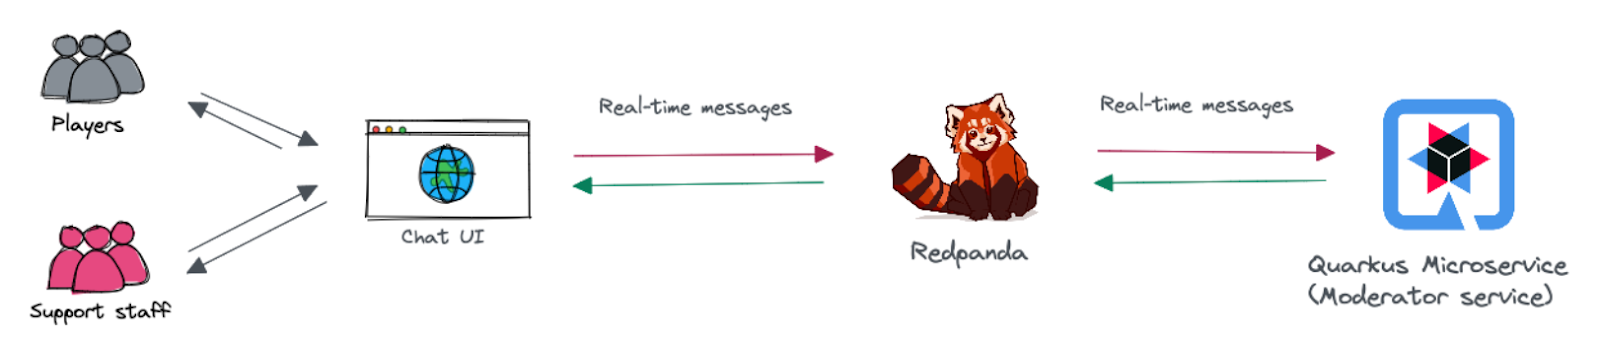 Real-time chat application architecture with Redpanda and Quarkus Microservice.